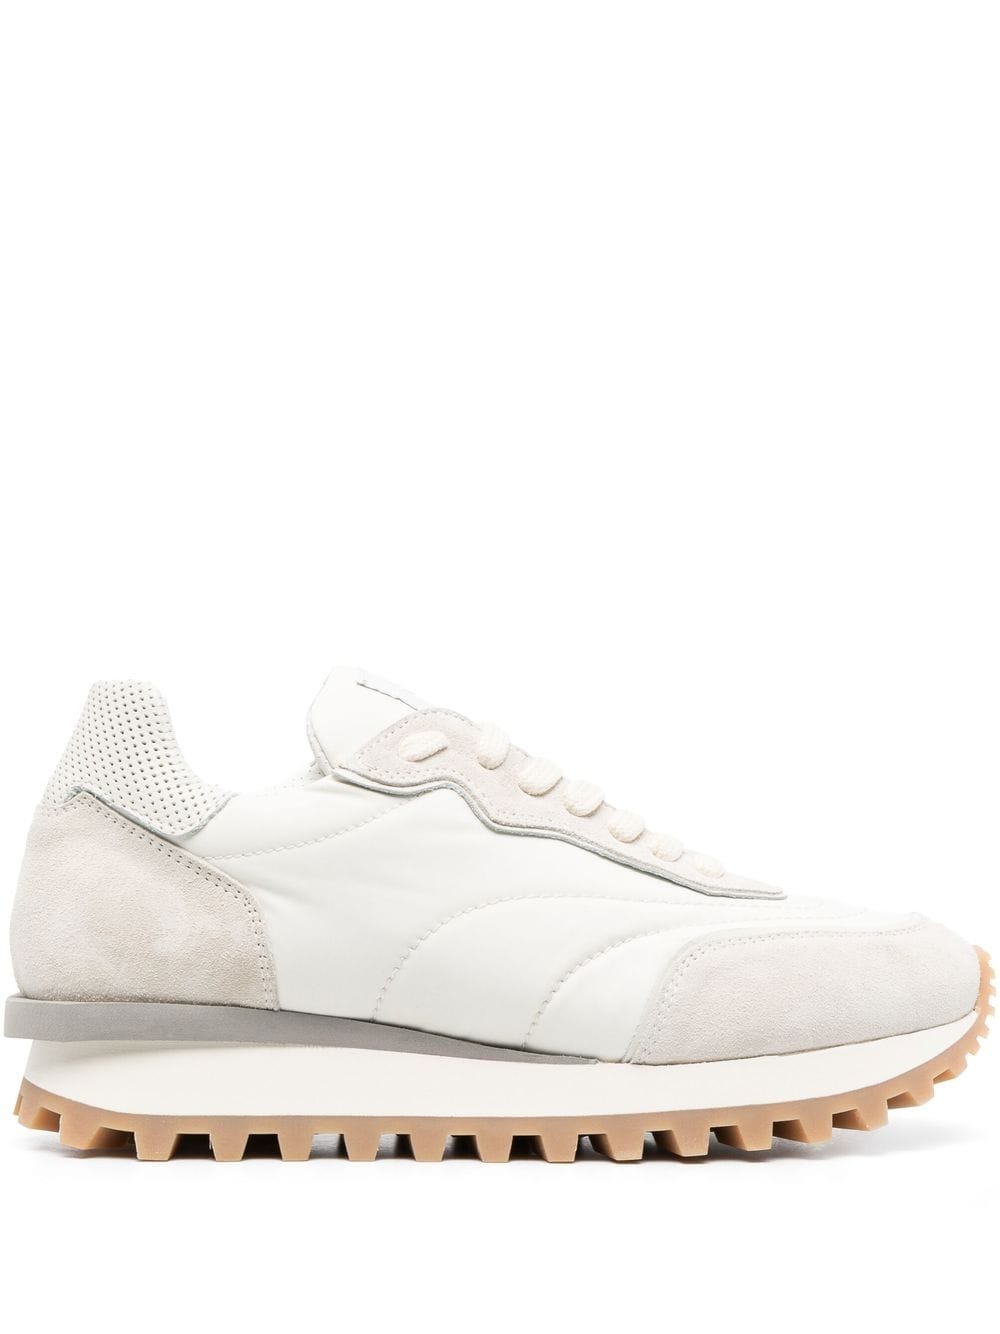 Eleventy deconstructed-sole panelled sneakers - White